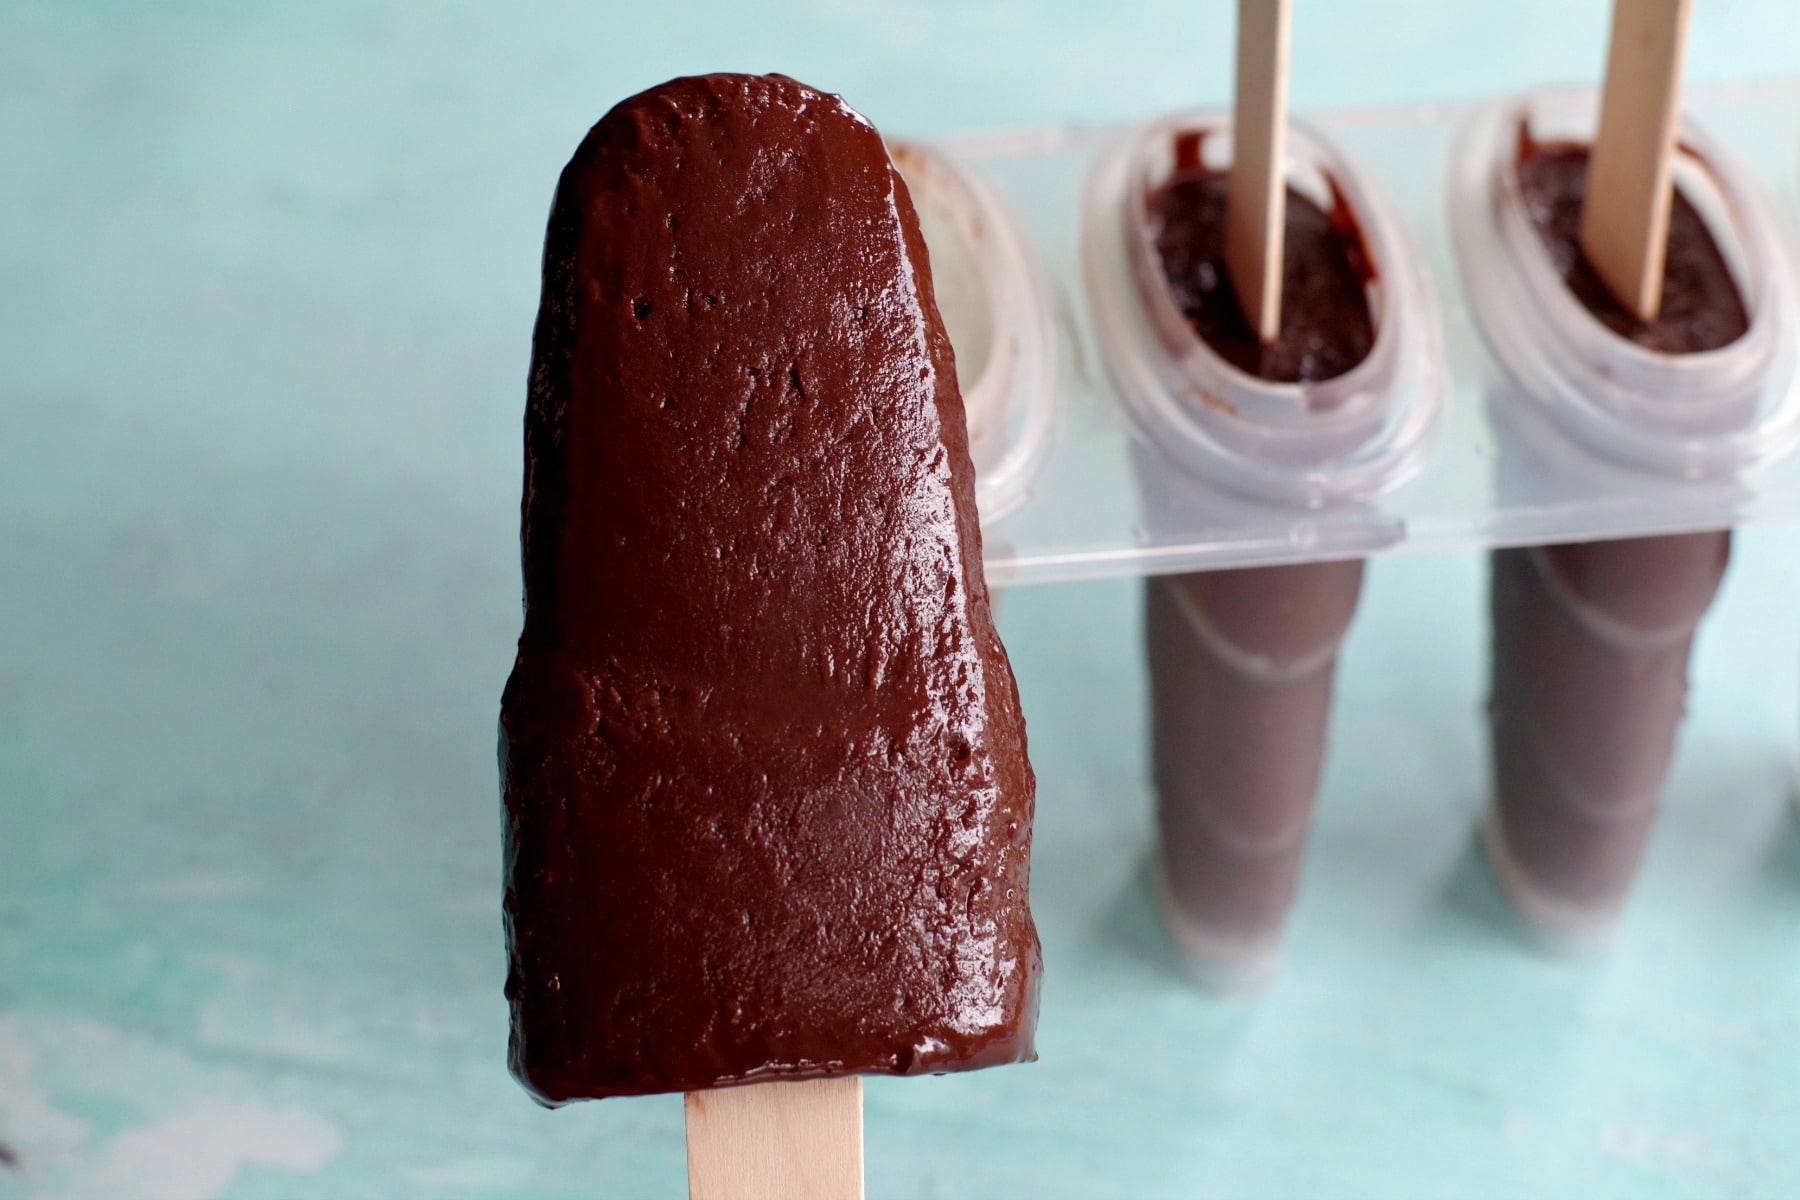 Chocolate Banana Popsicle in front of popsicle mold